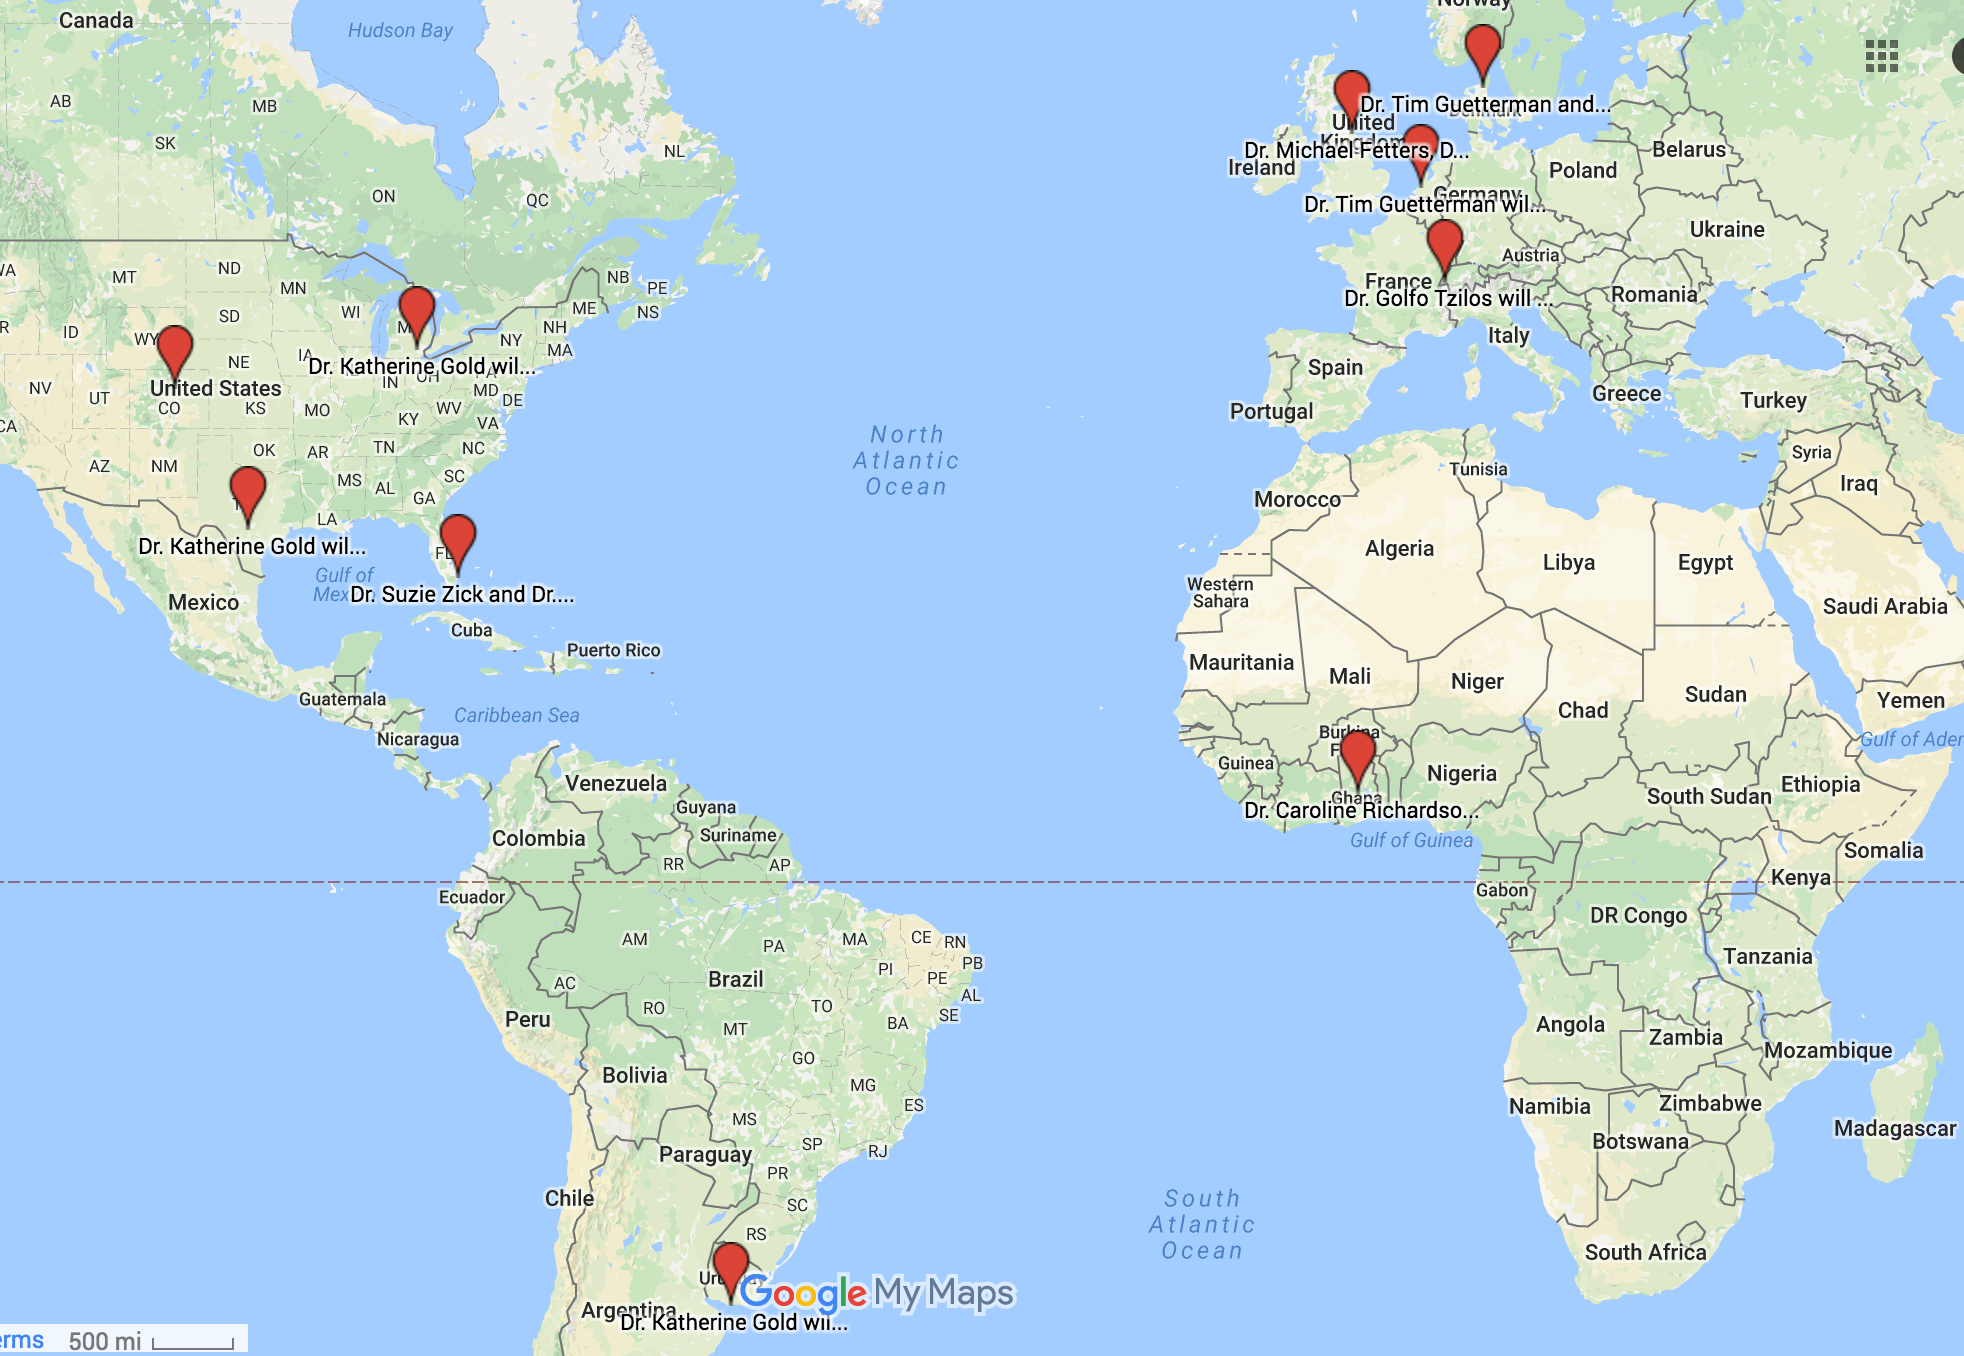 image of google map with points for each faculty lecture